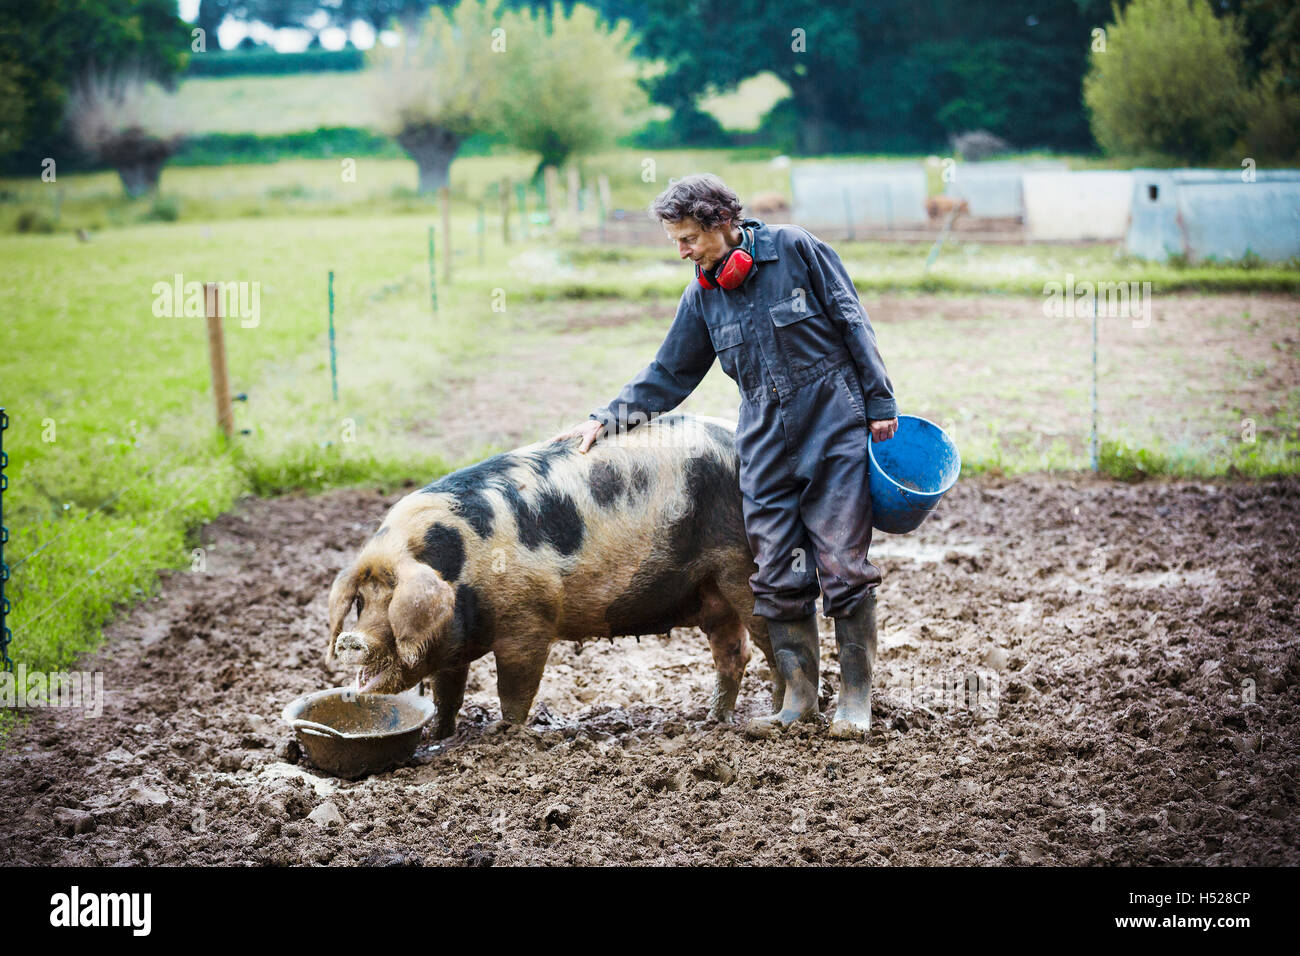 Woman stood next to a pig eating, holding a bucket. Stock Photo